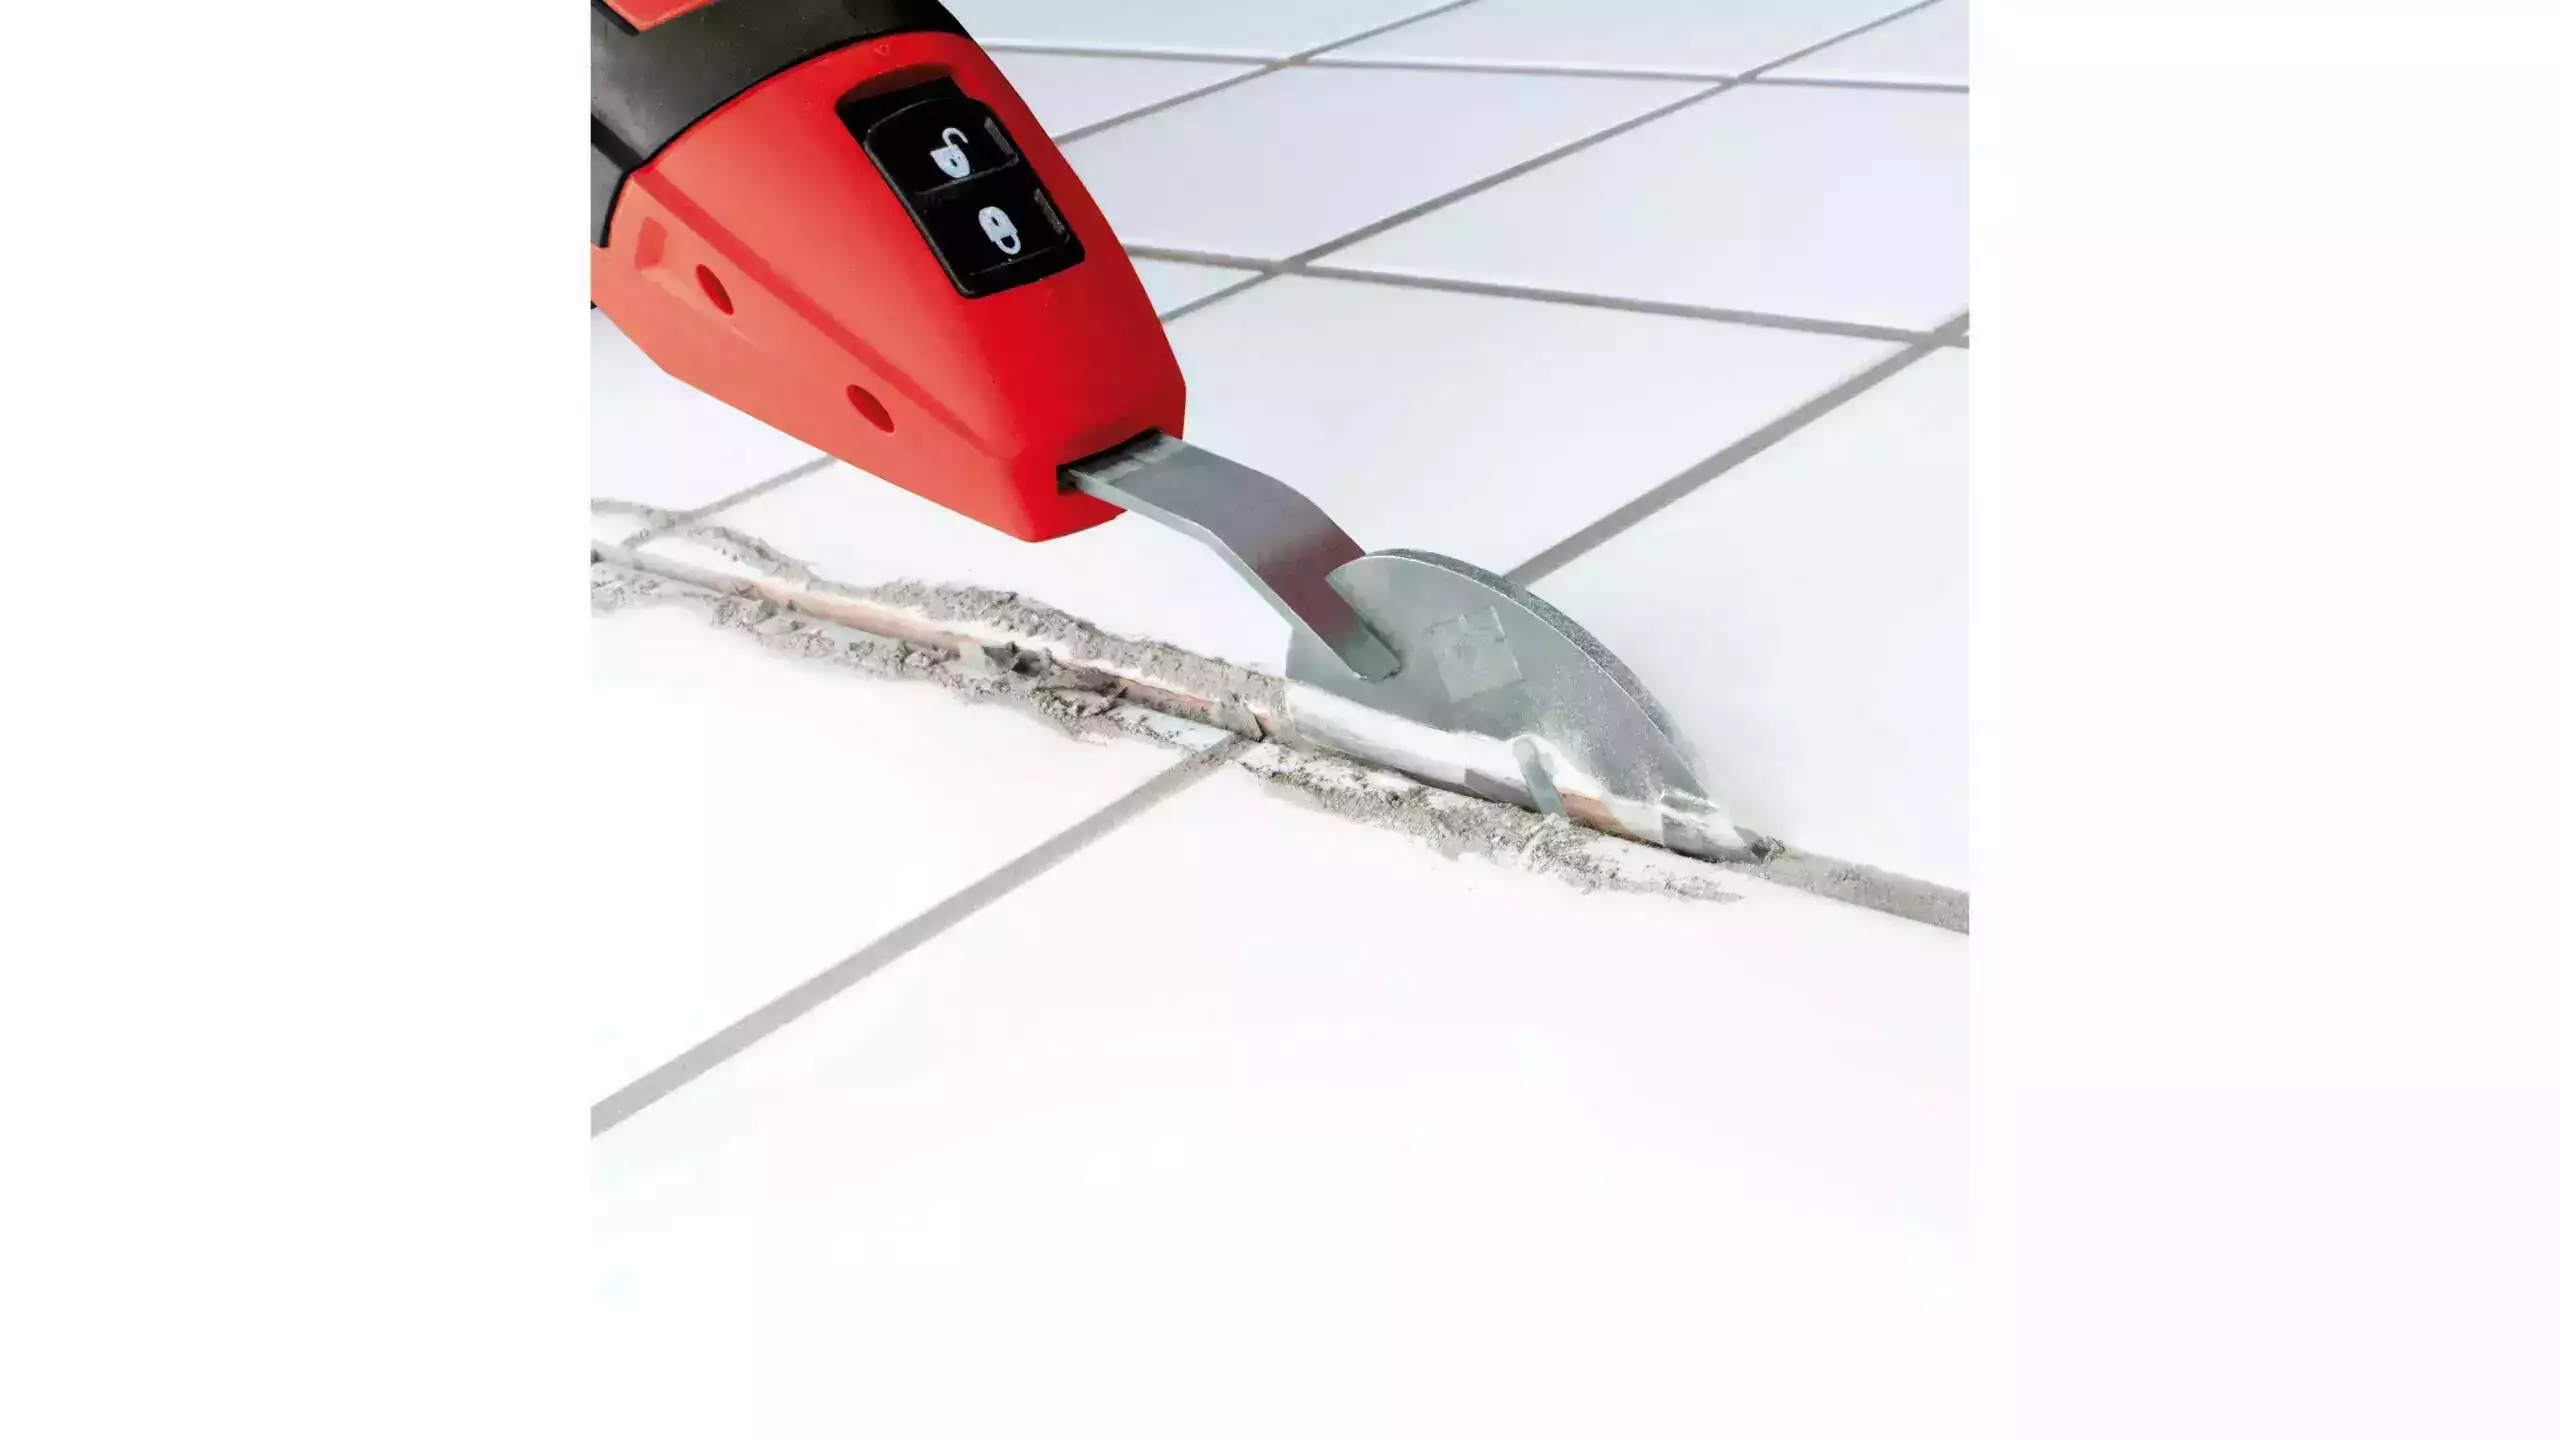 tile removal tools